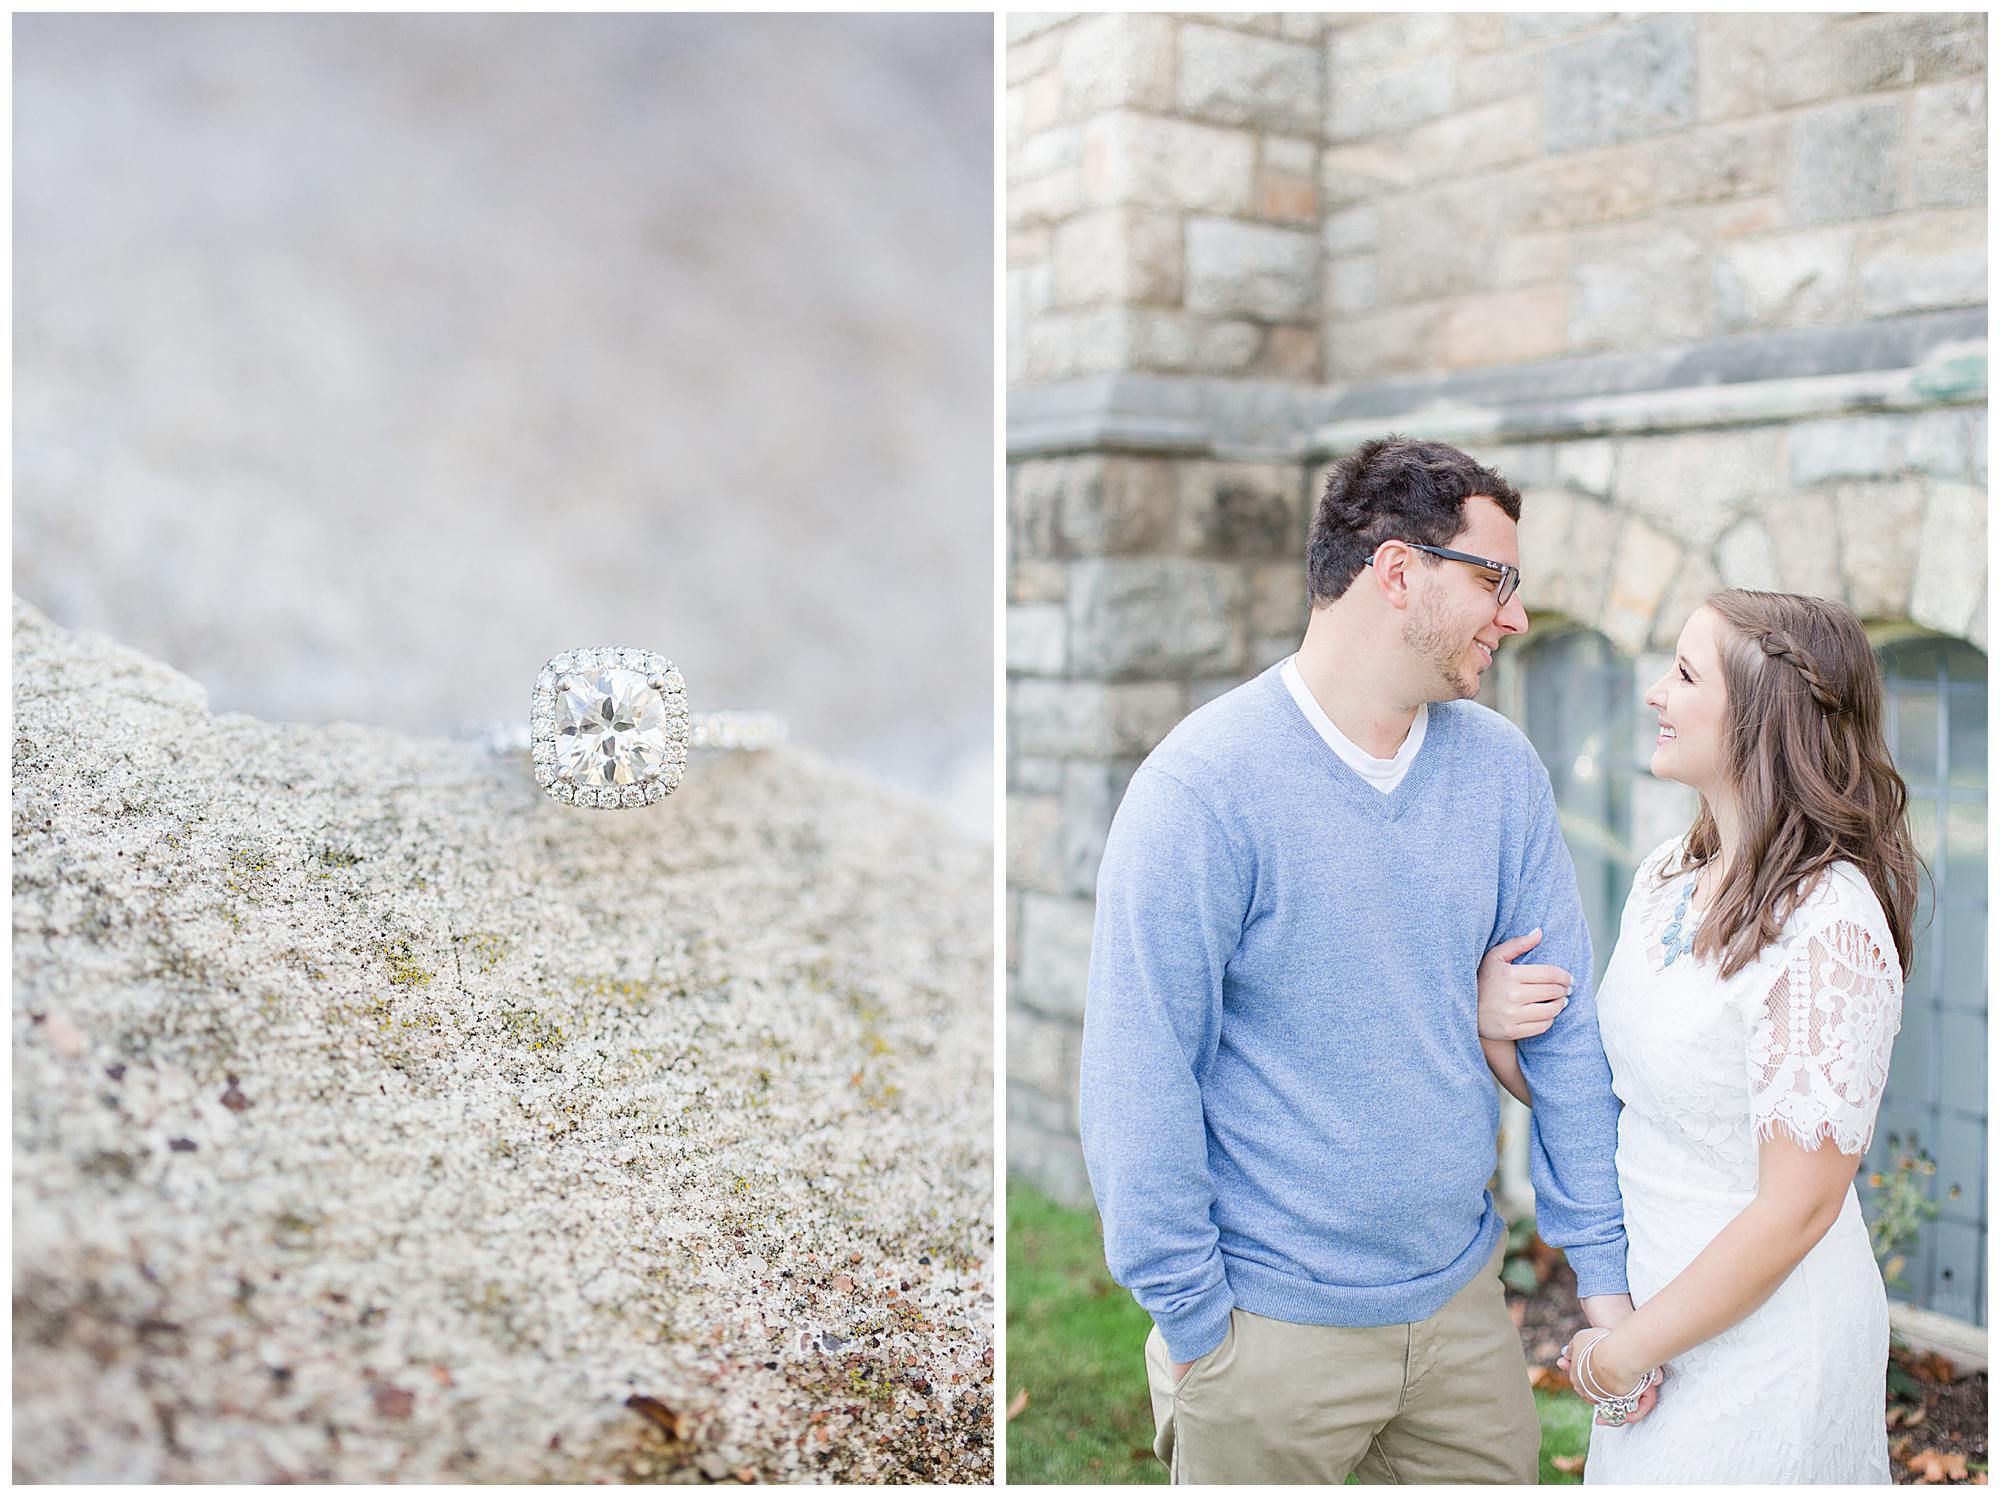 Andrea + Brian | New England Engagement